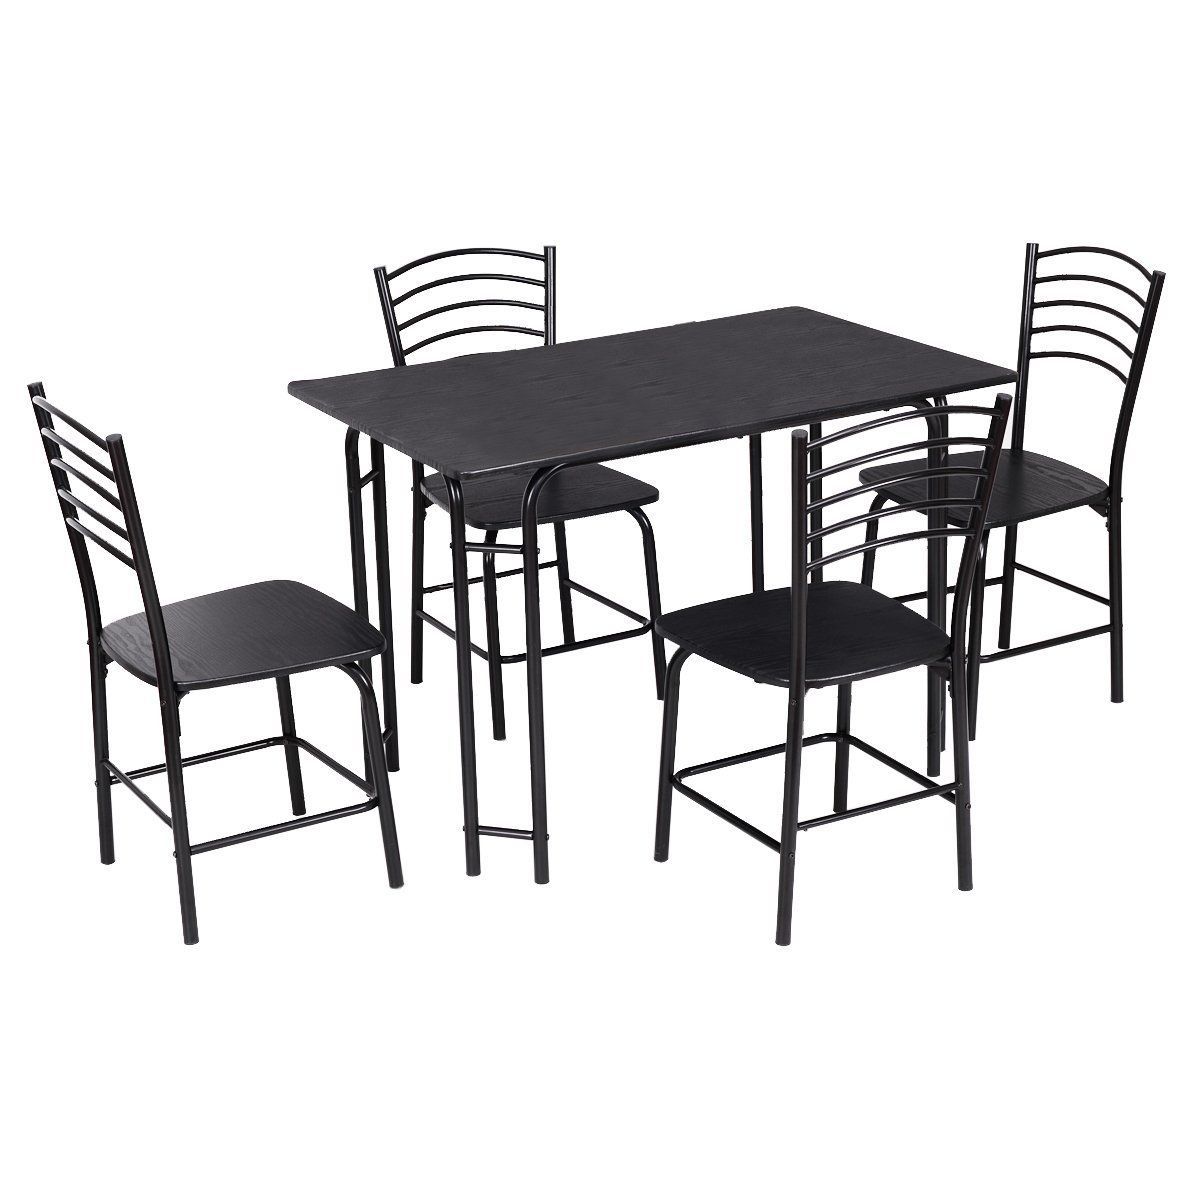 Amazon – Giantex 5 Pcs Black Dining Set Table 4 Chairs Steel Within Most Recent Casiano 5 Piece Dining Sets (View 18 of 20)